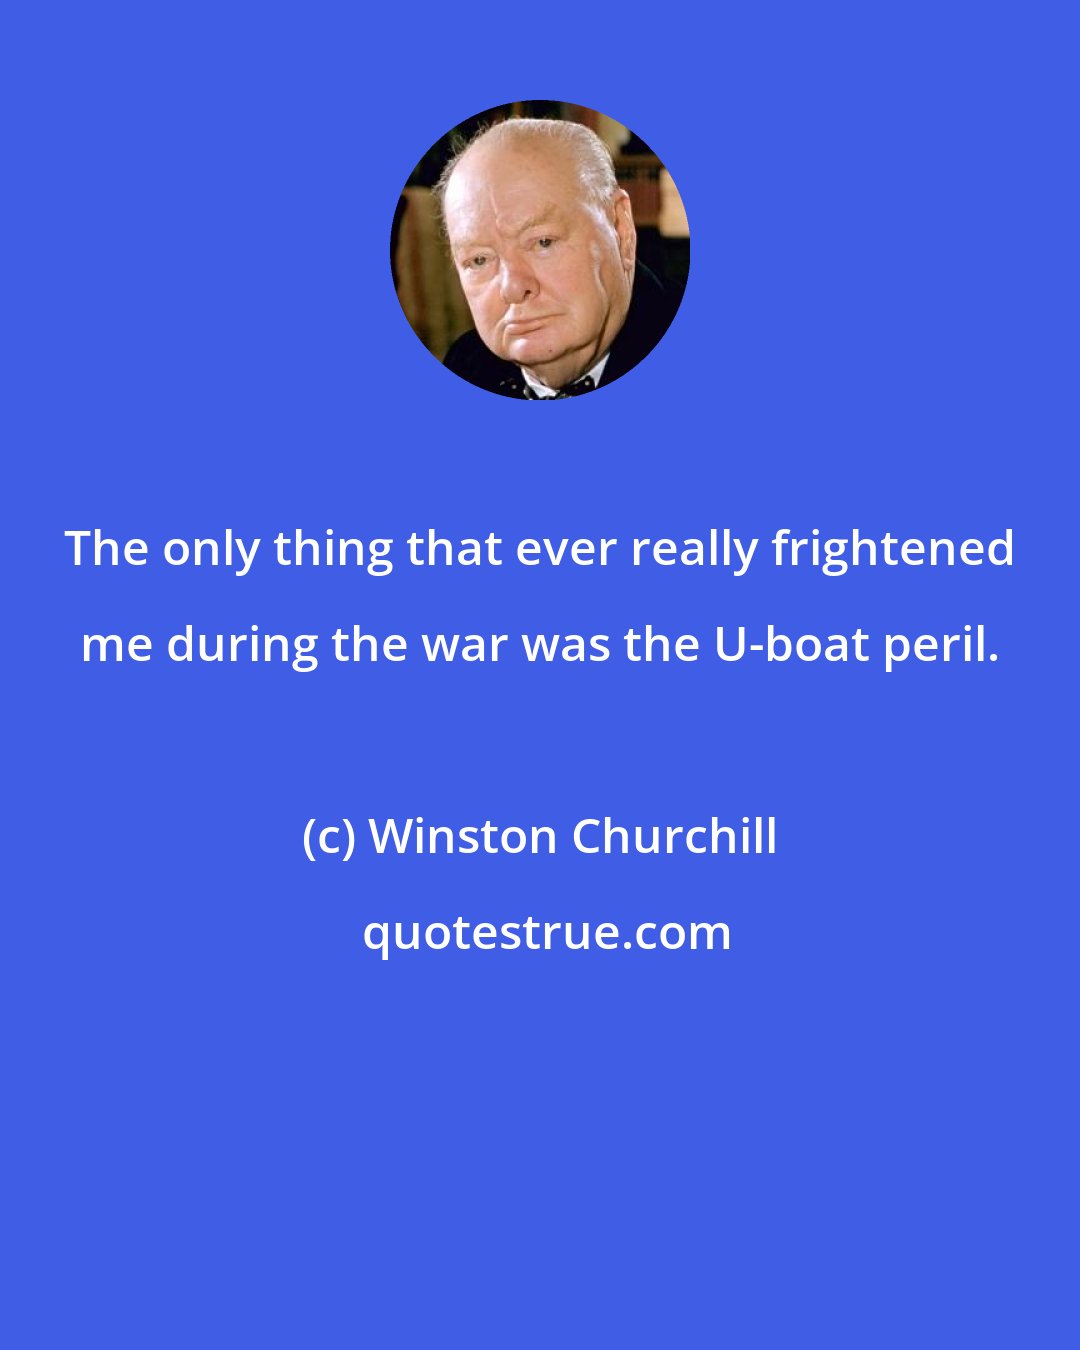 Winston Churchill: The only thing that ever really frightened me during the war was the U-boat peril.